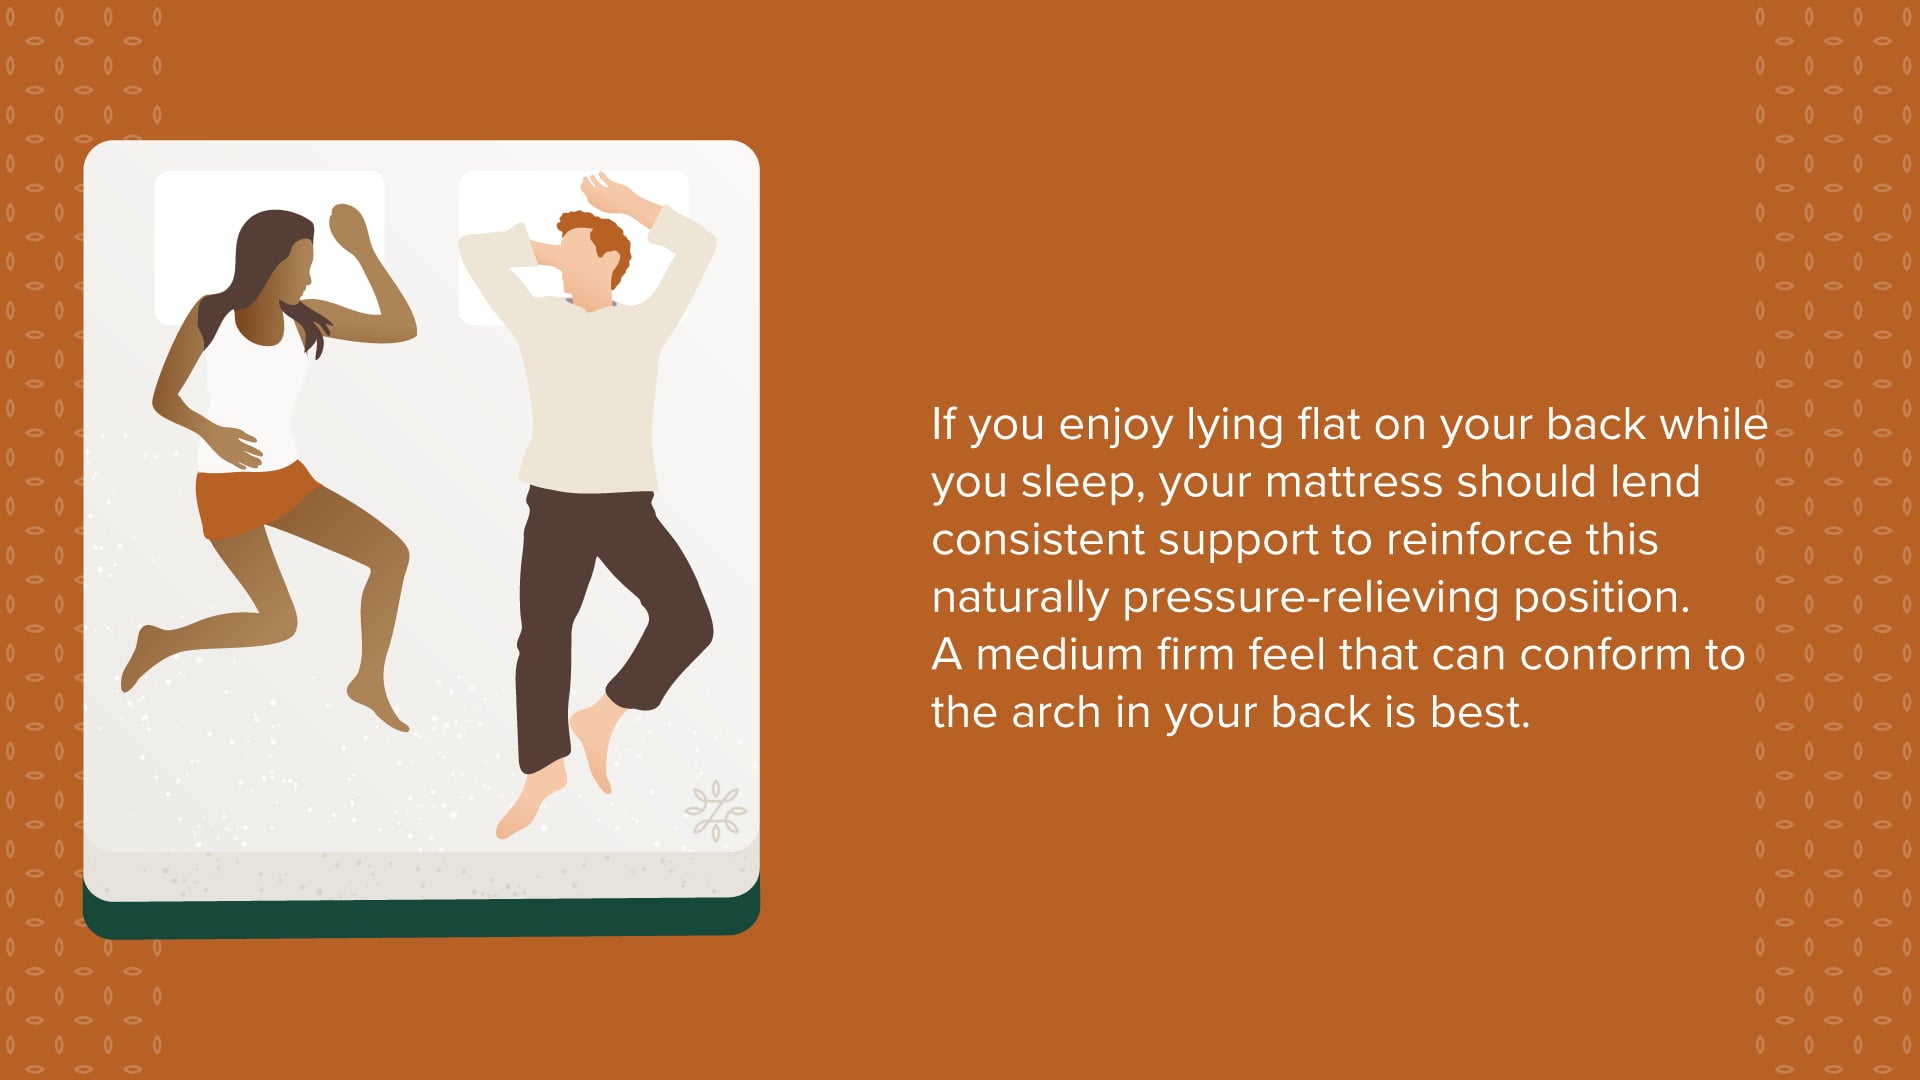 back sleeper your mattress should lend consistent support to reinforce this naturally pressure-relieving position